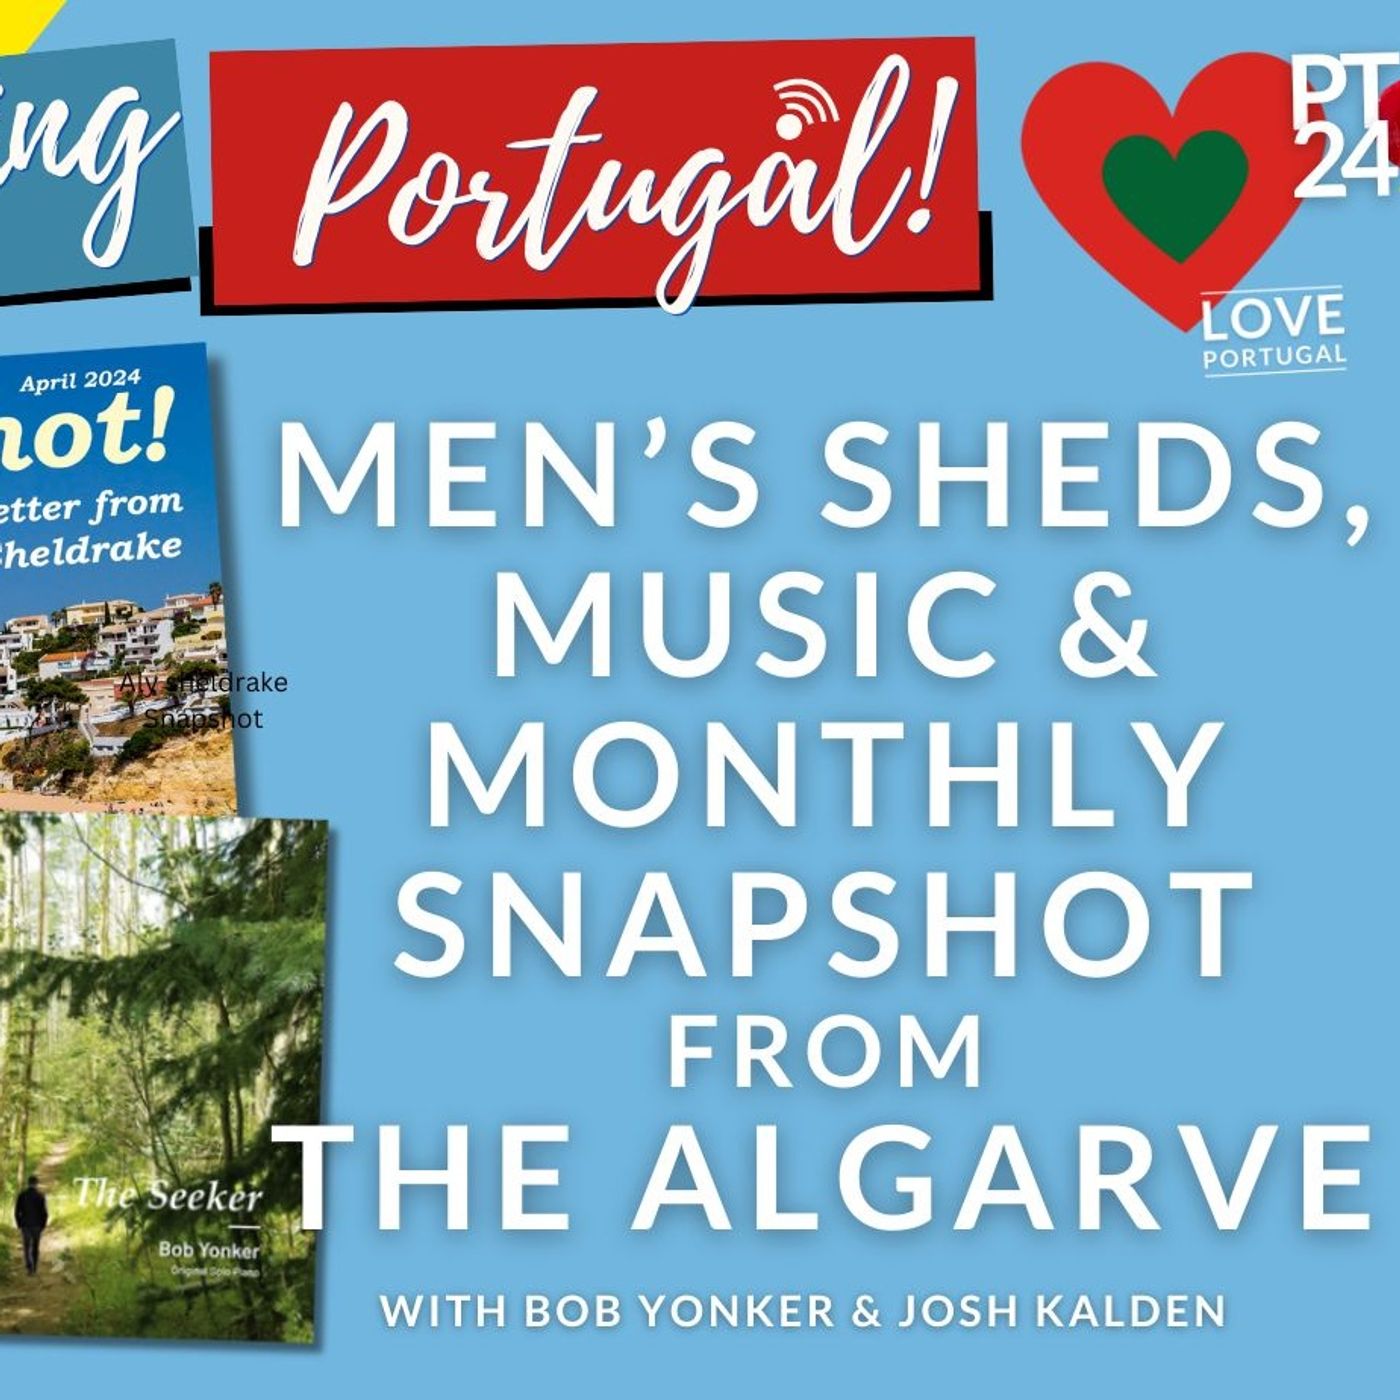 Men's Sheds, Mystical Music & Monthly Snapshot from The Algarve on The GMP!